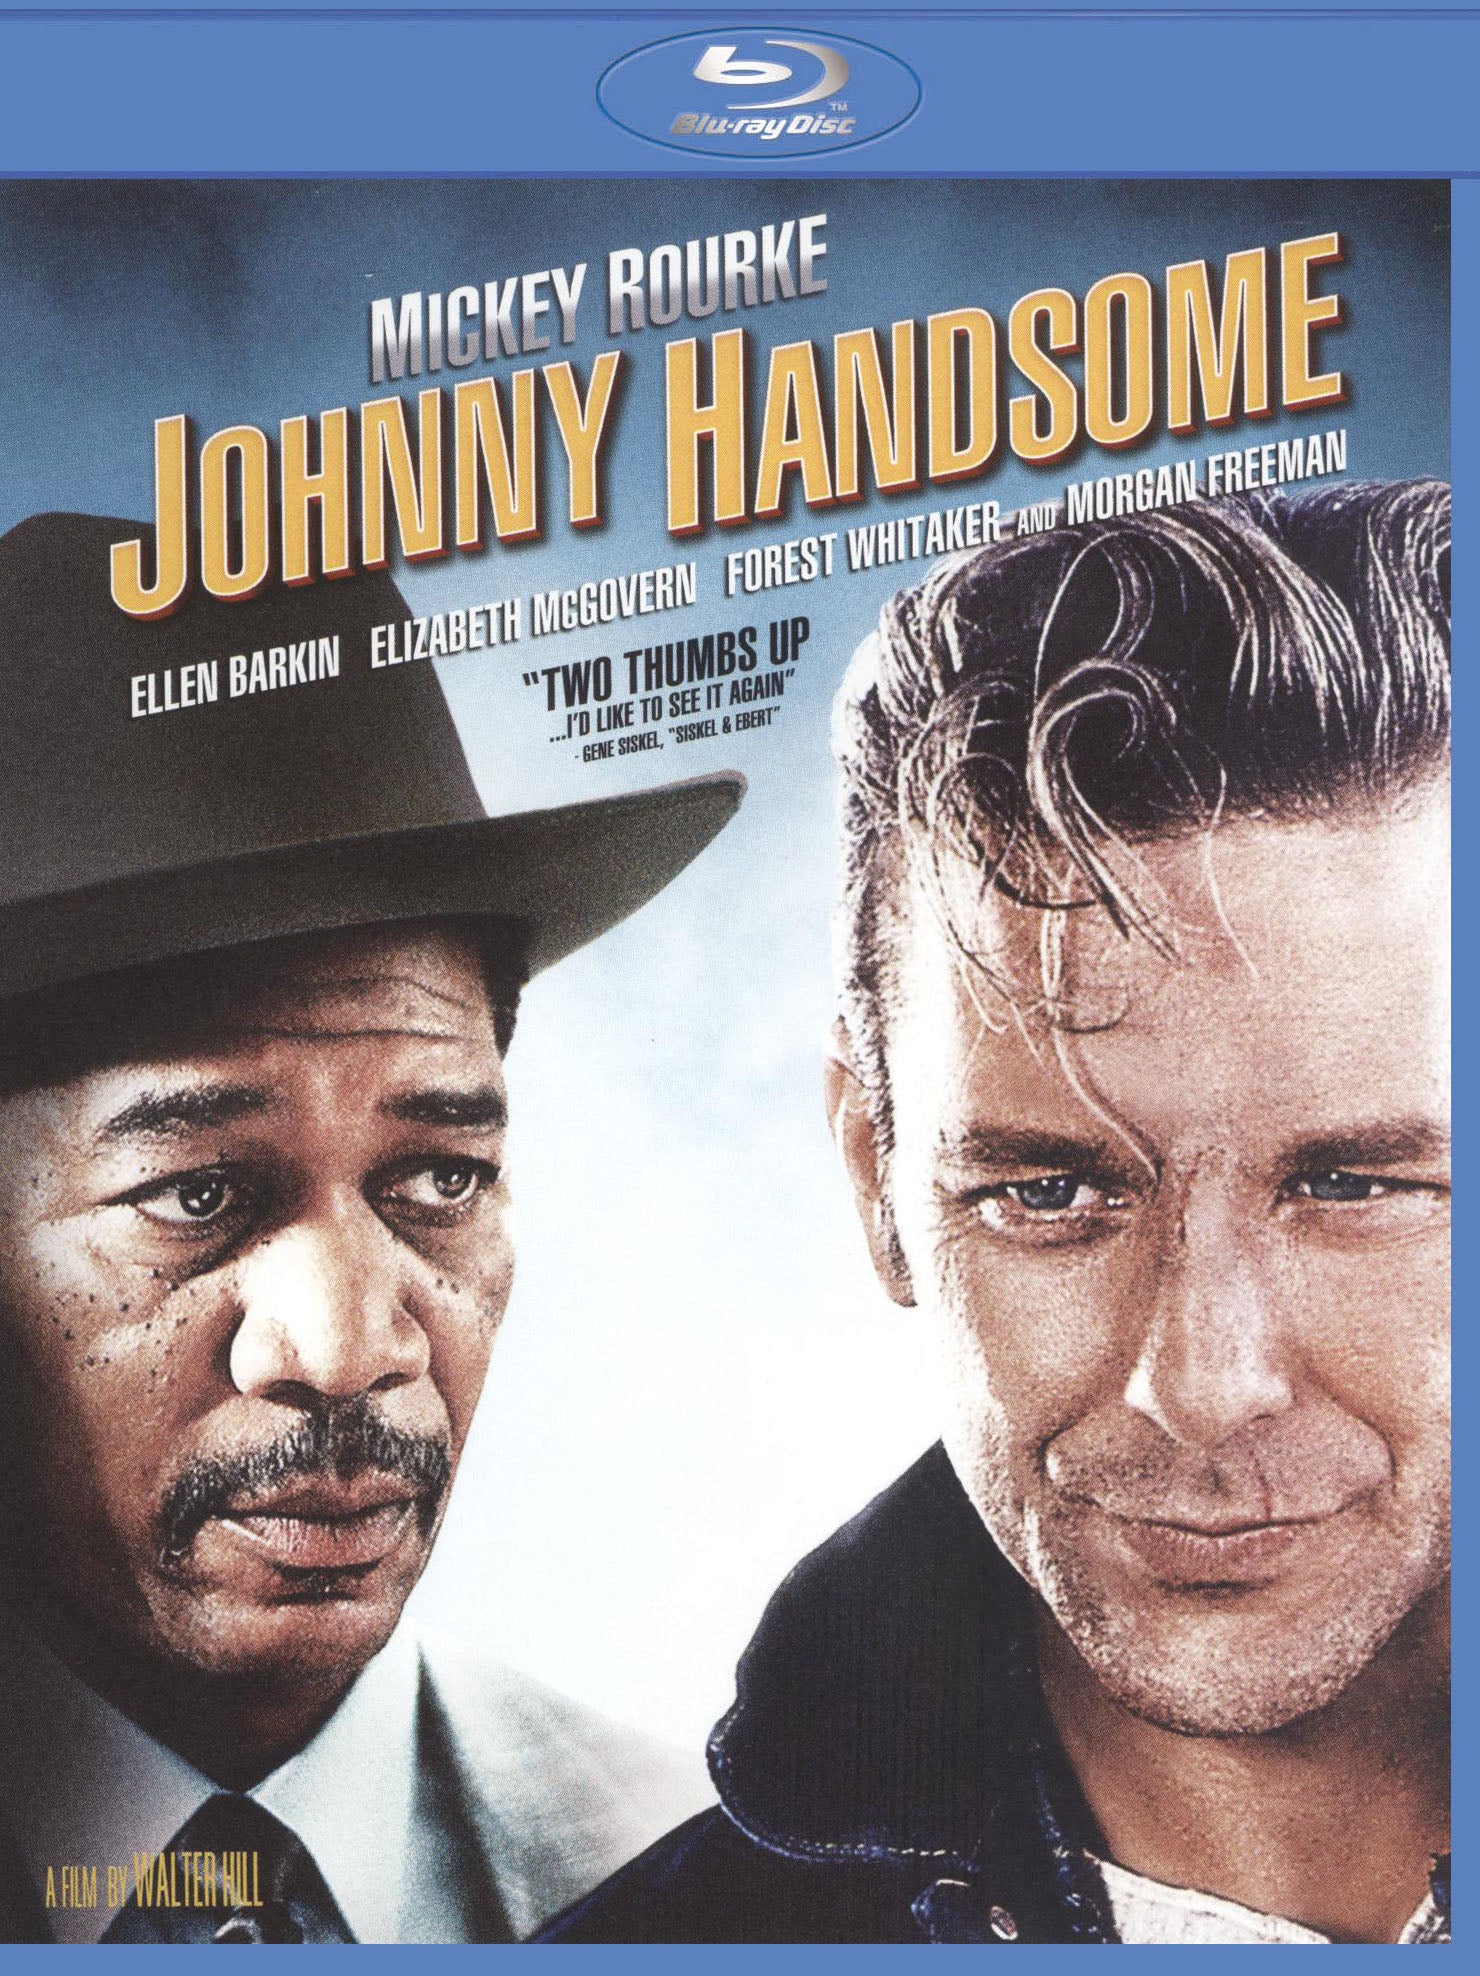 Johnny Handsome [Blu-ray] cover art